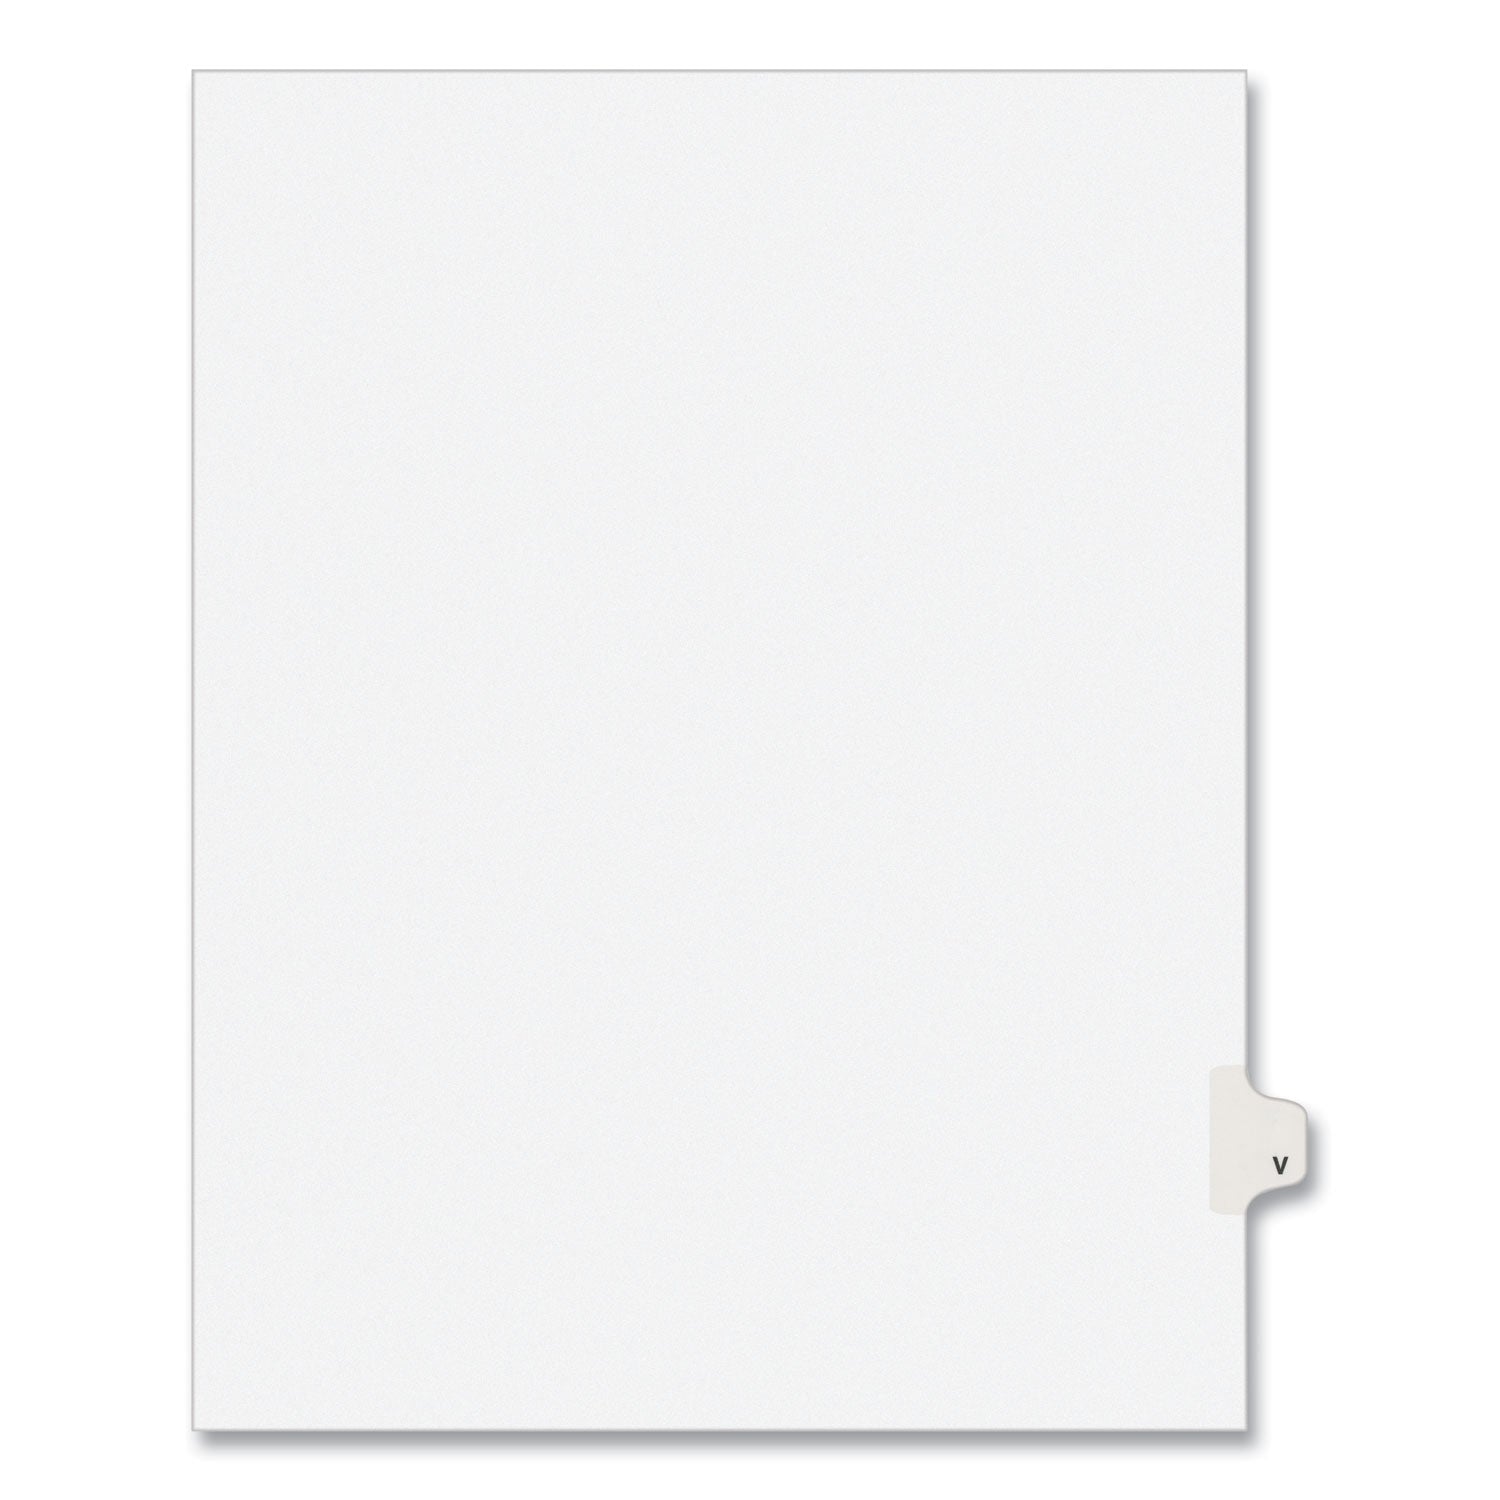 Preprinted Legal Exhibit Side Tab Index Dividers, Avery Style, 26-Tab, V, 11 x 8.5, White, 25/Pack, (1422) - 